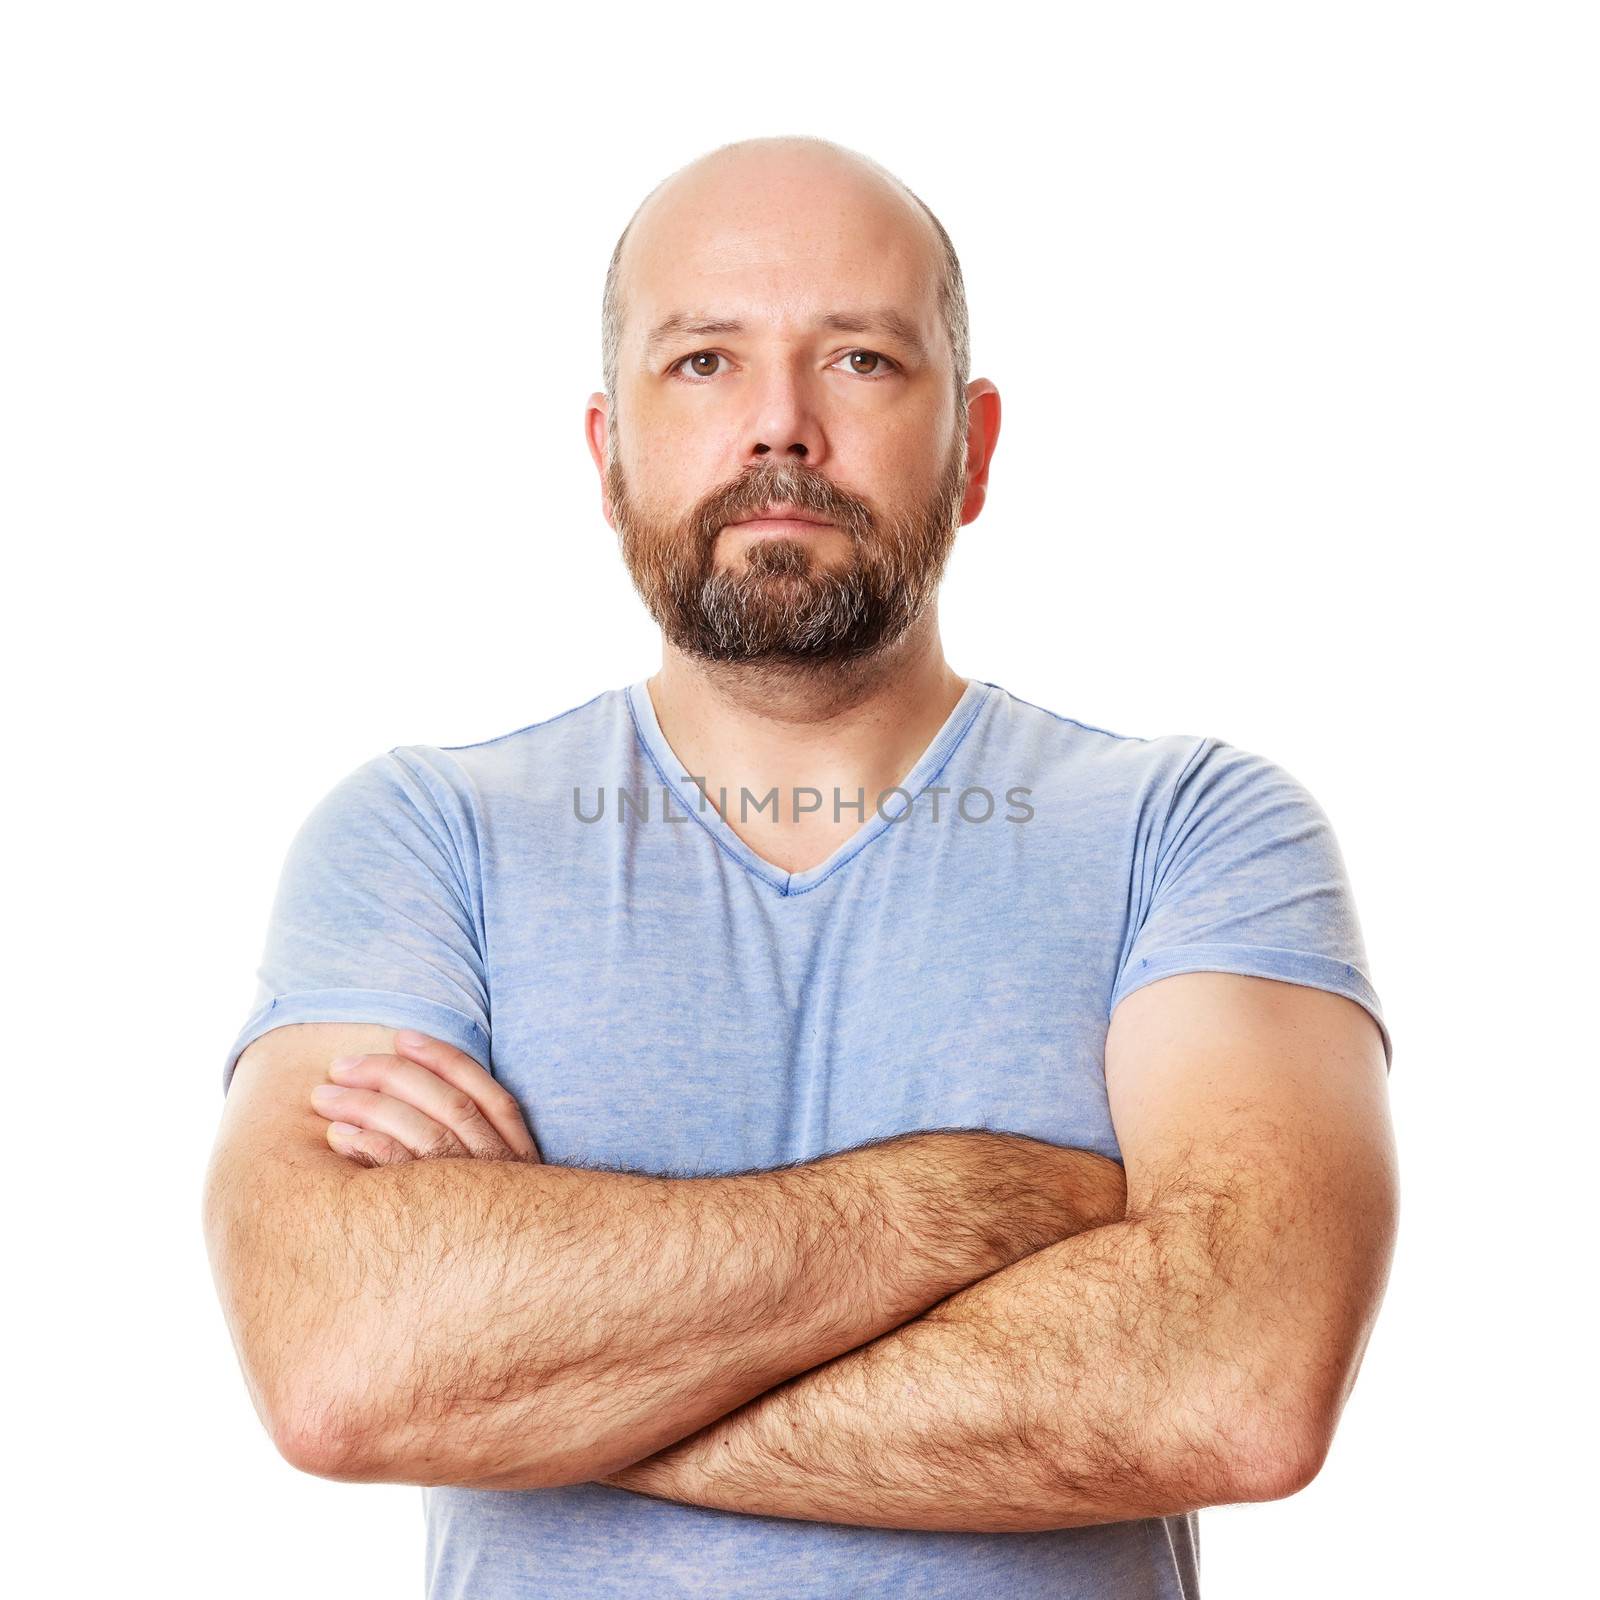 An image of a handsome man with a beard